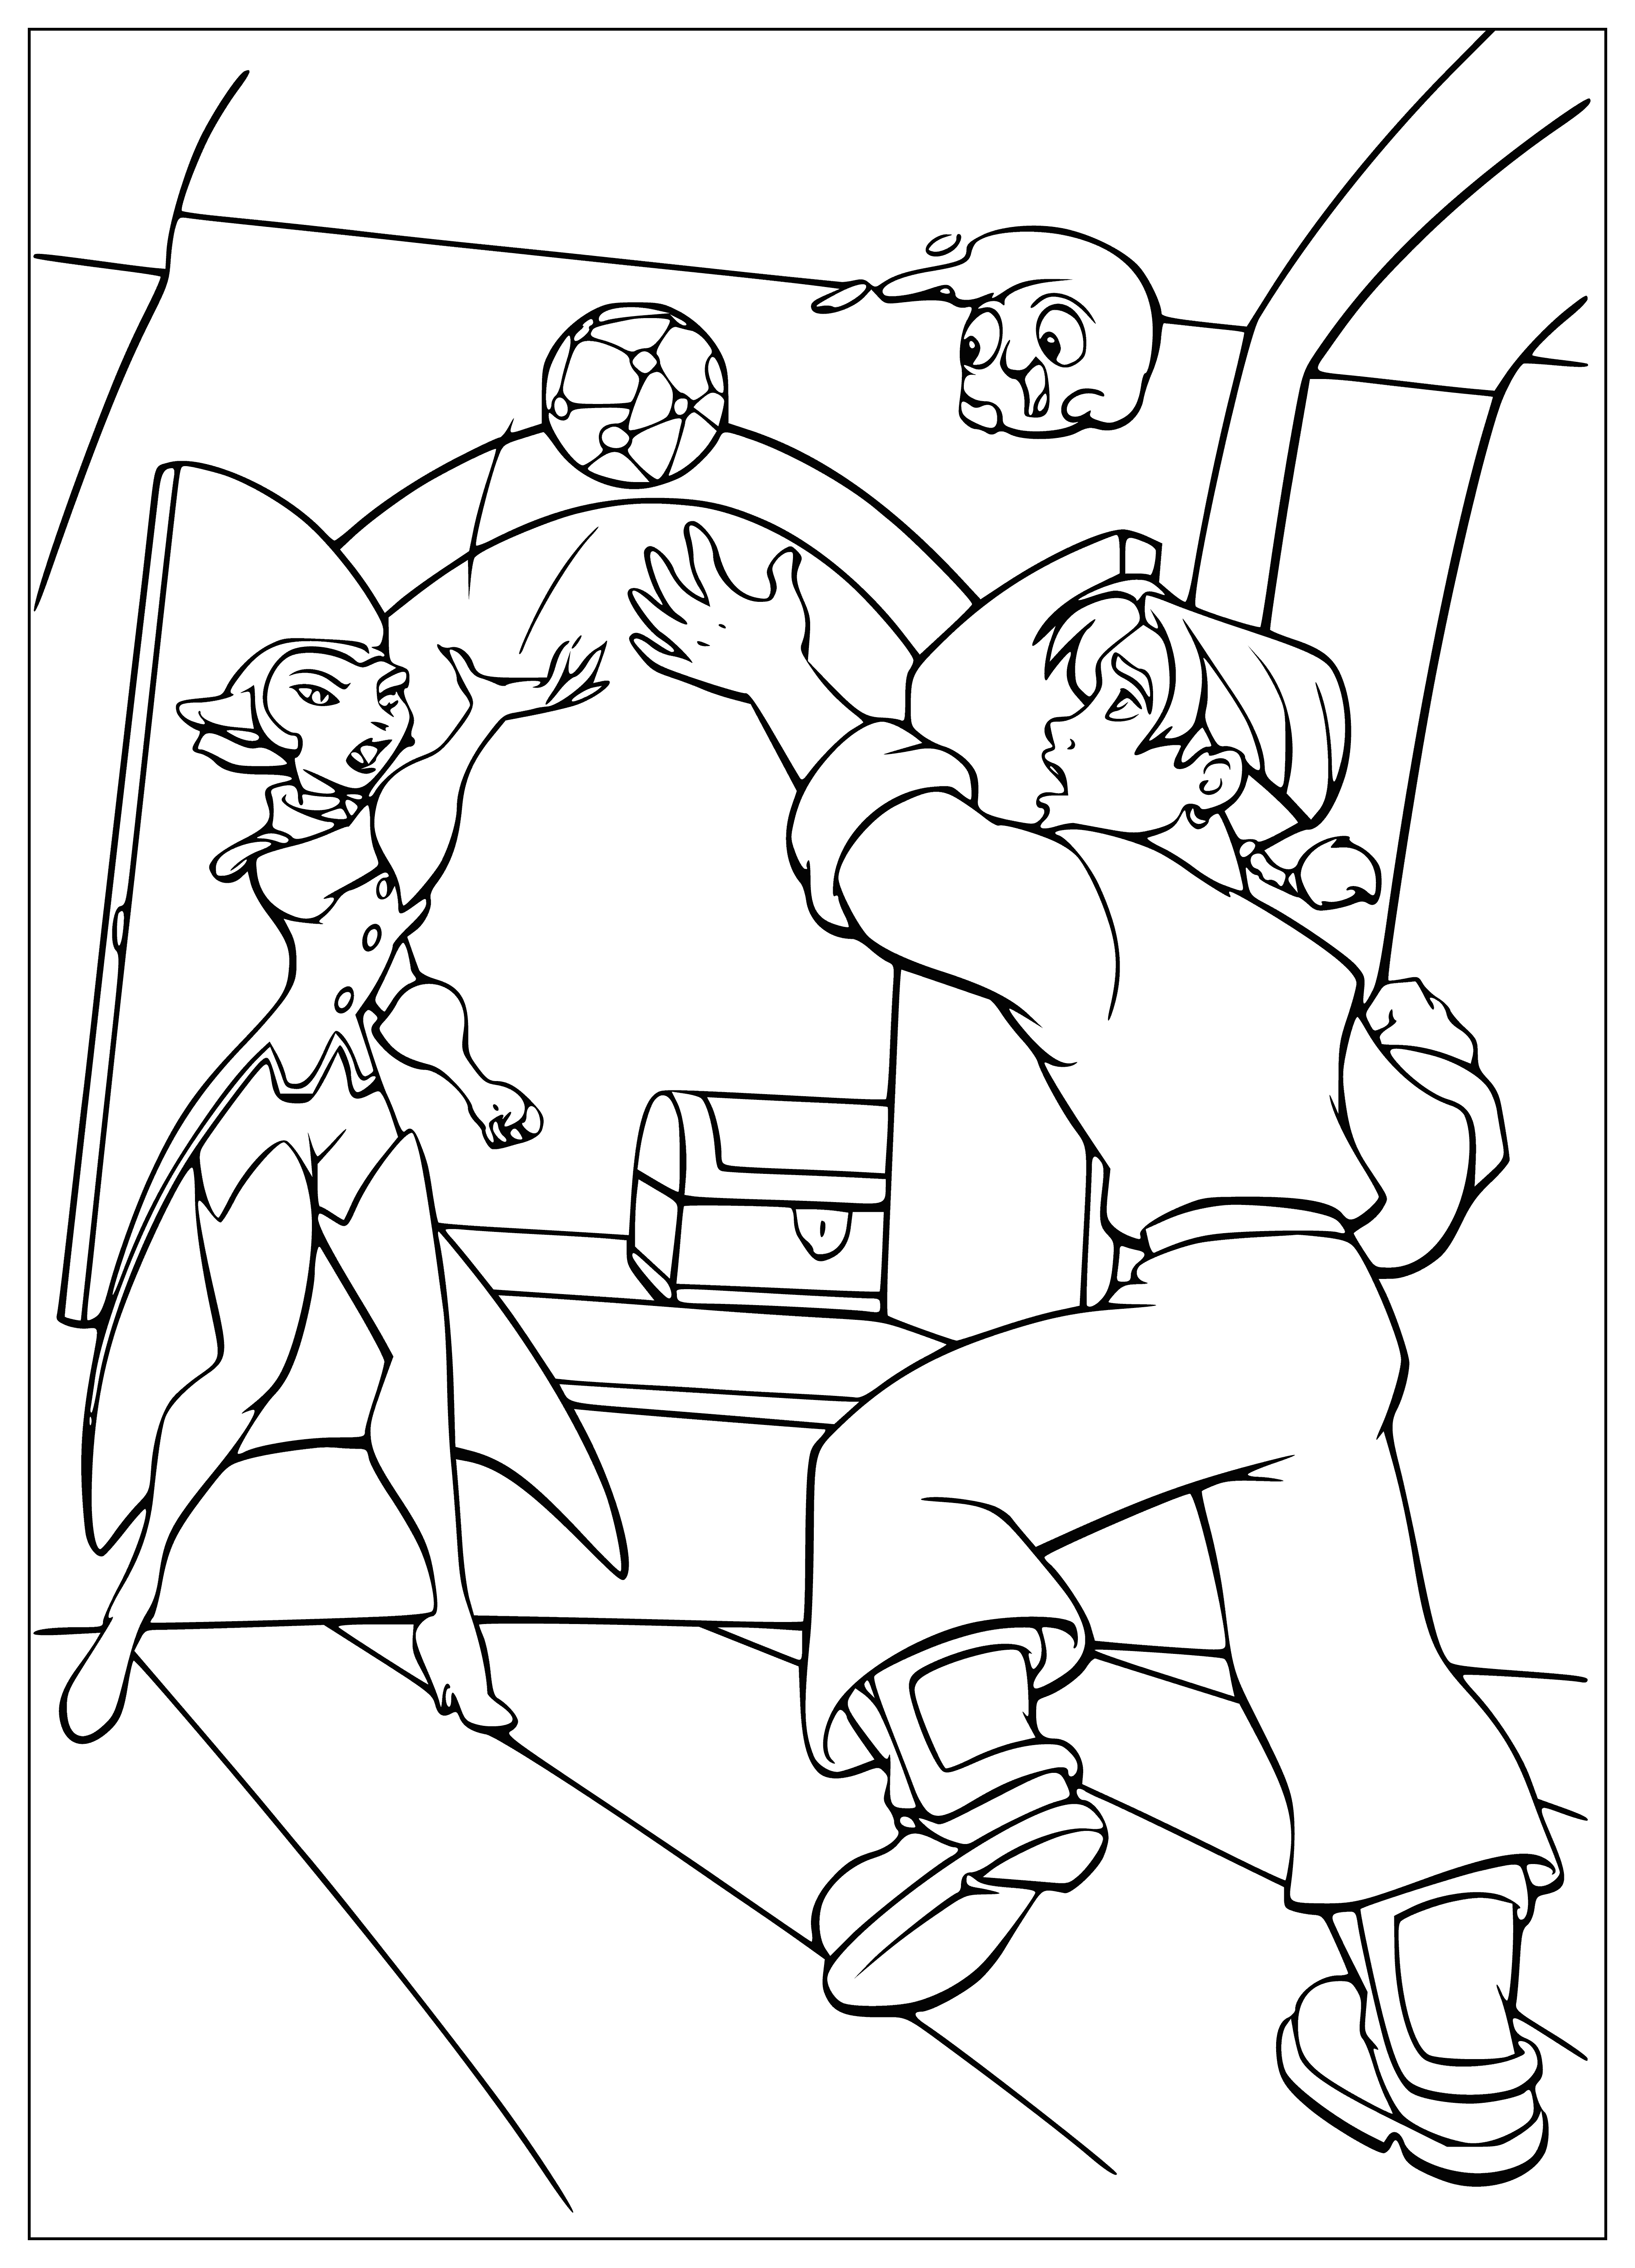 coloring page: Captain hands map to Jim, who is excited. Captain relieved to be rid of it, map well-used with folds & creases.